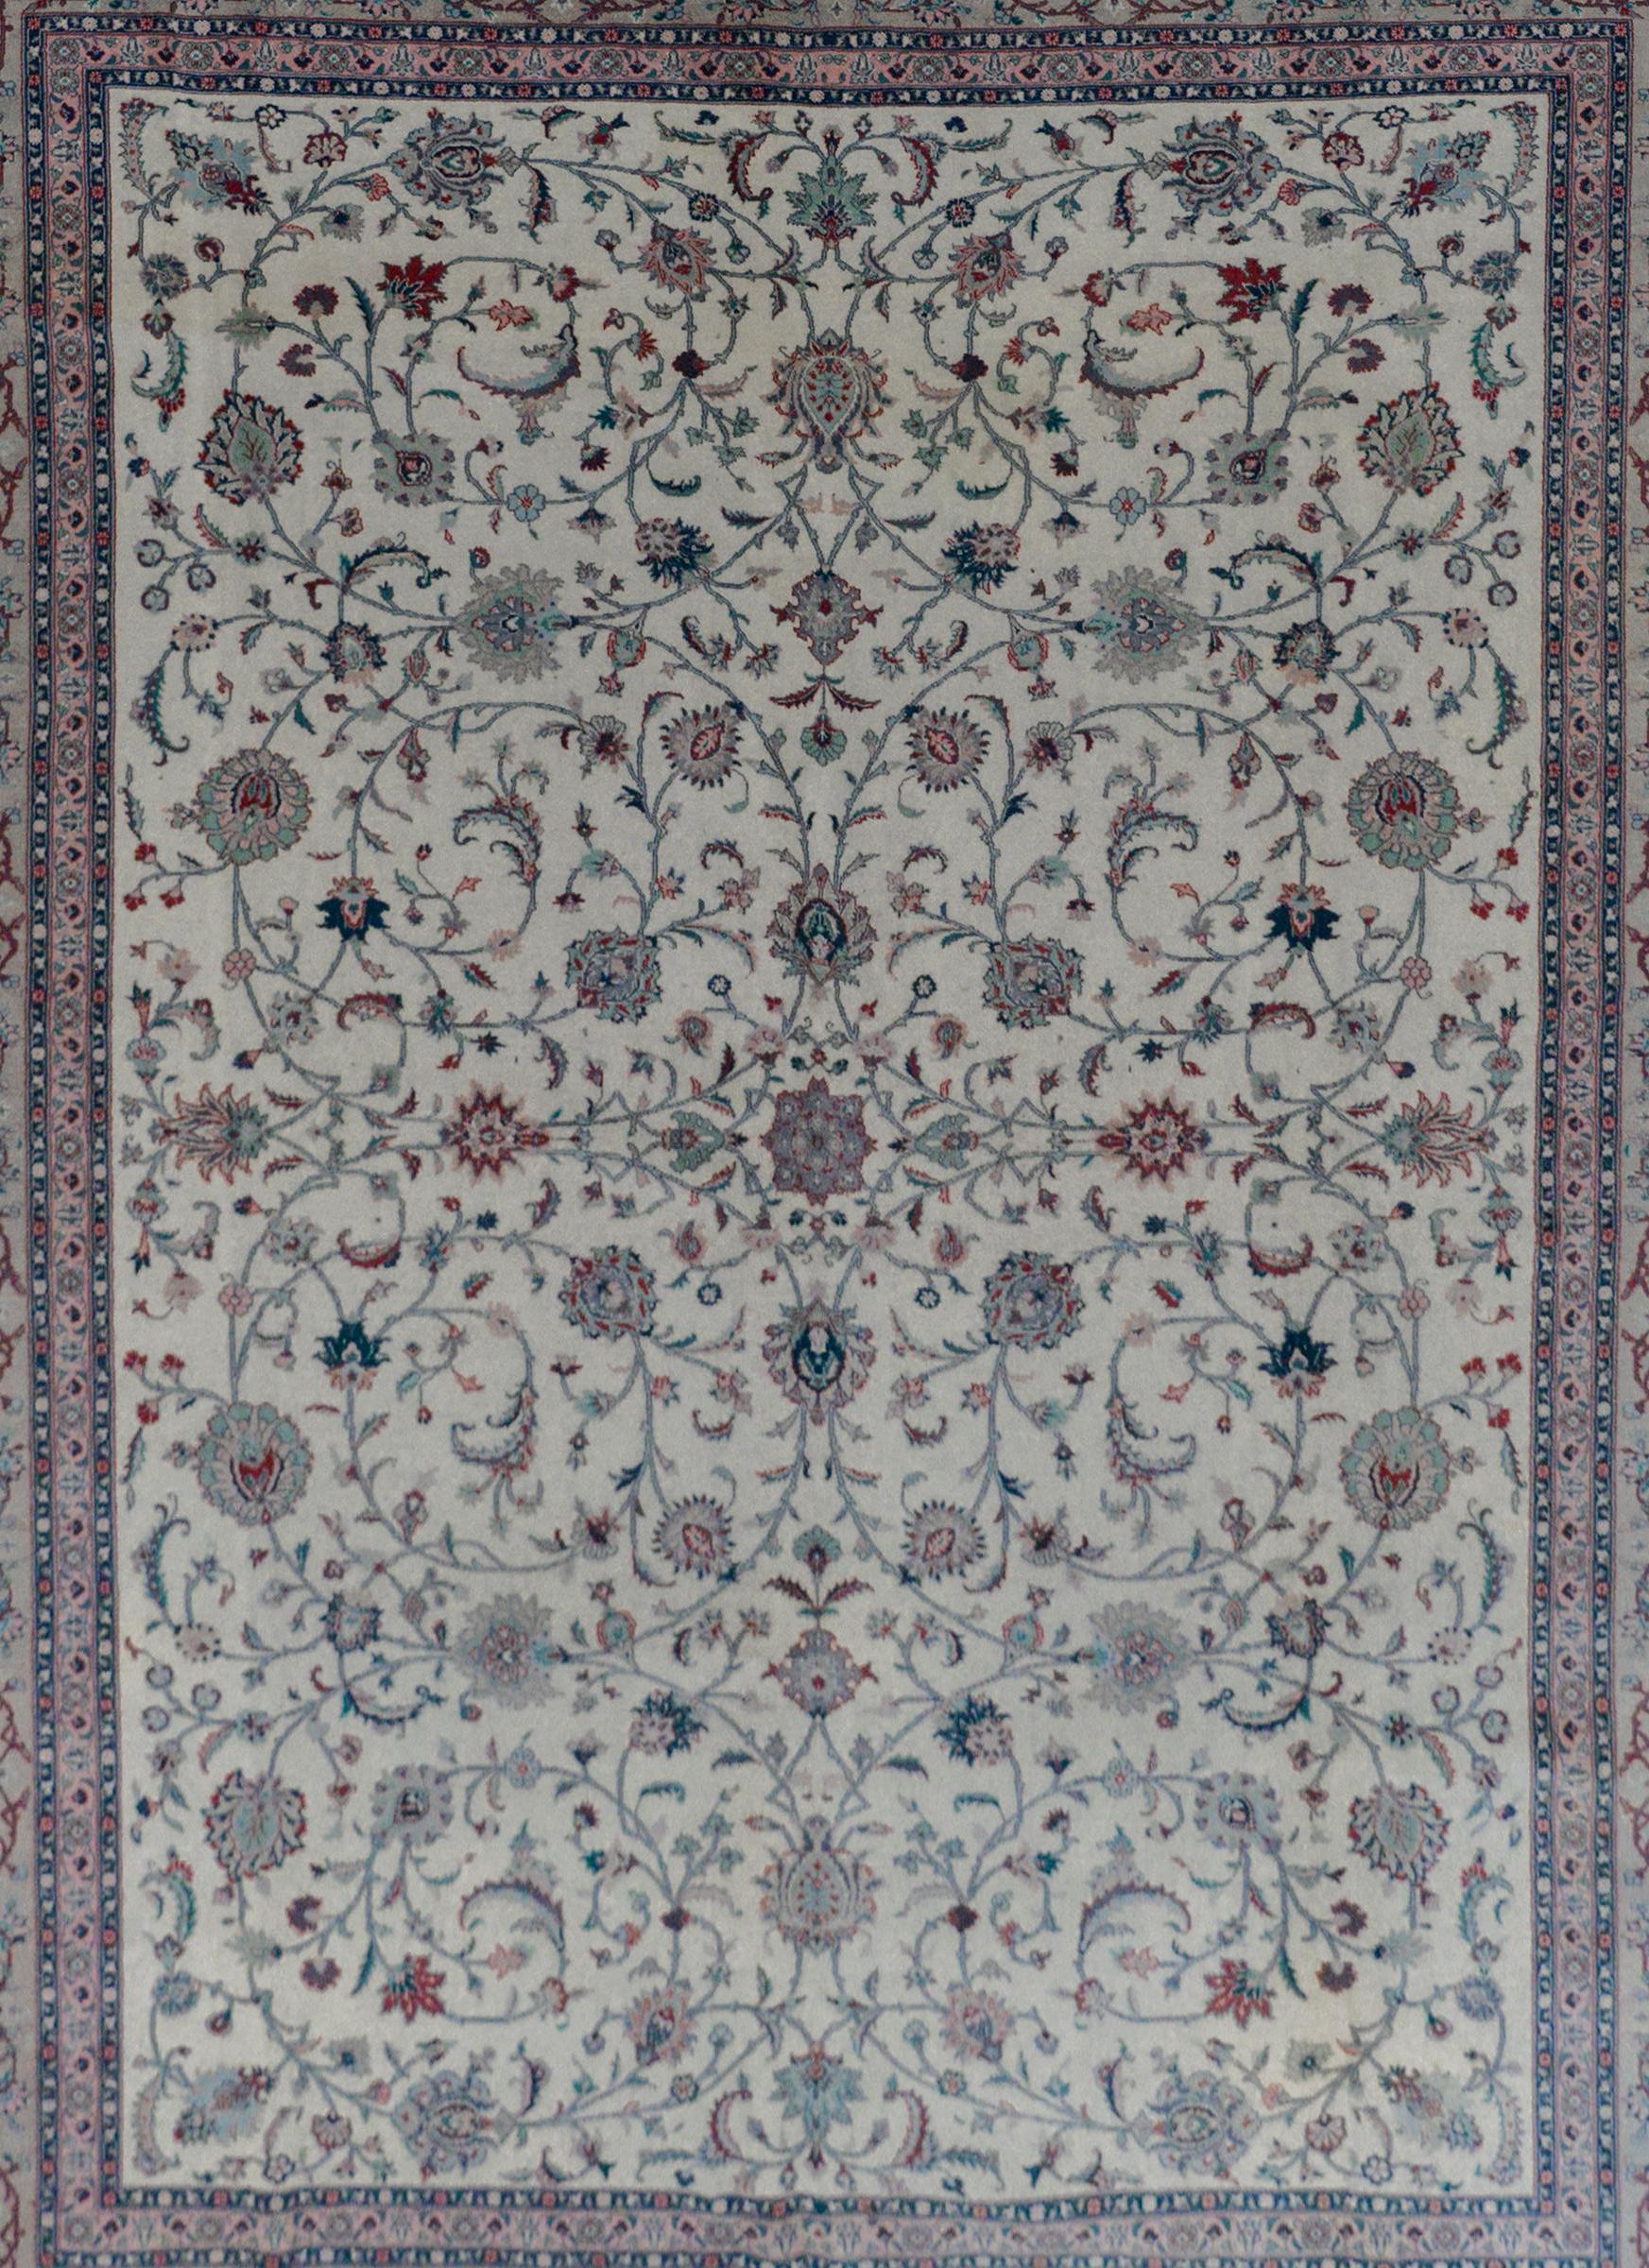 A fantastic vintage Indian Tabriz rug with an all-over pattern of large-scale flowers and scrolling vines woven in crimson, light and dark indigo, teal and pink all on a cream colored background. The border is outstanding with a floral and scrolling